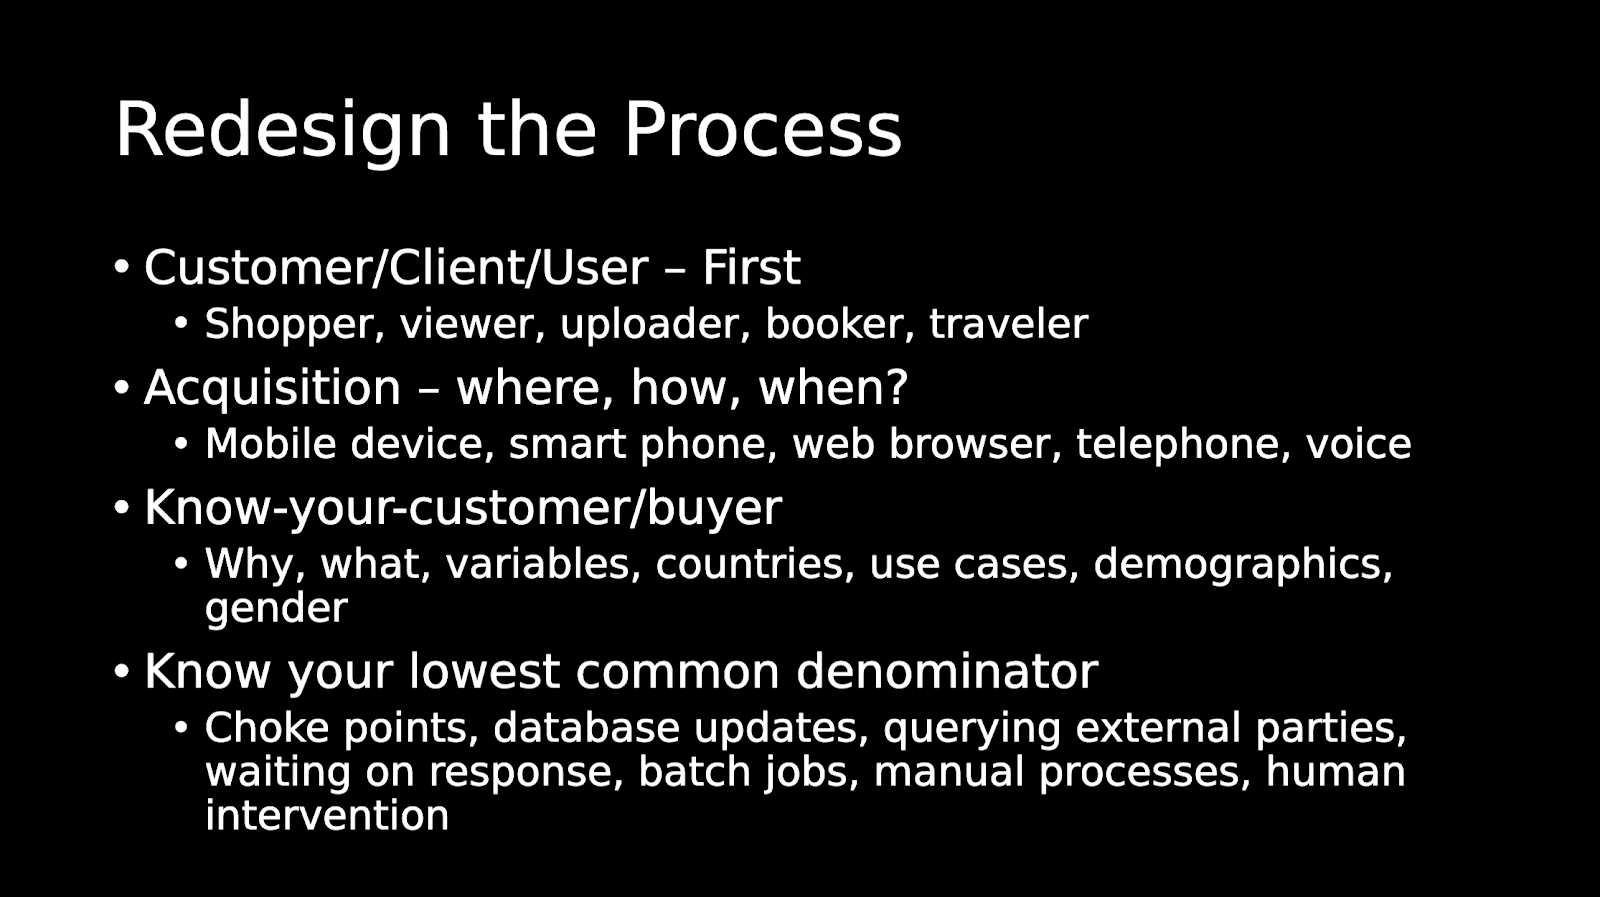 Redesign the process slide